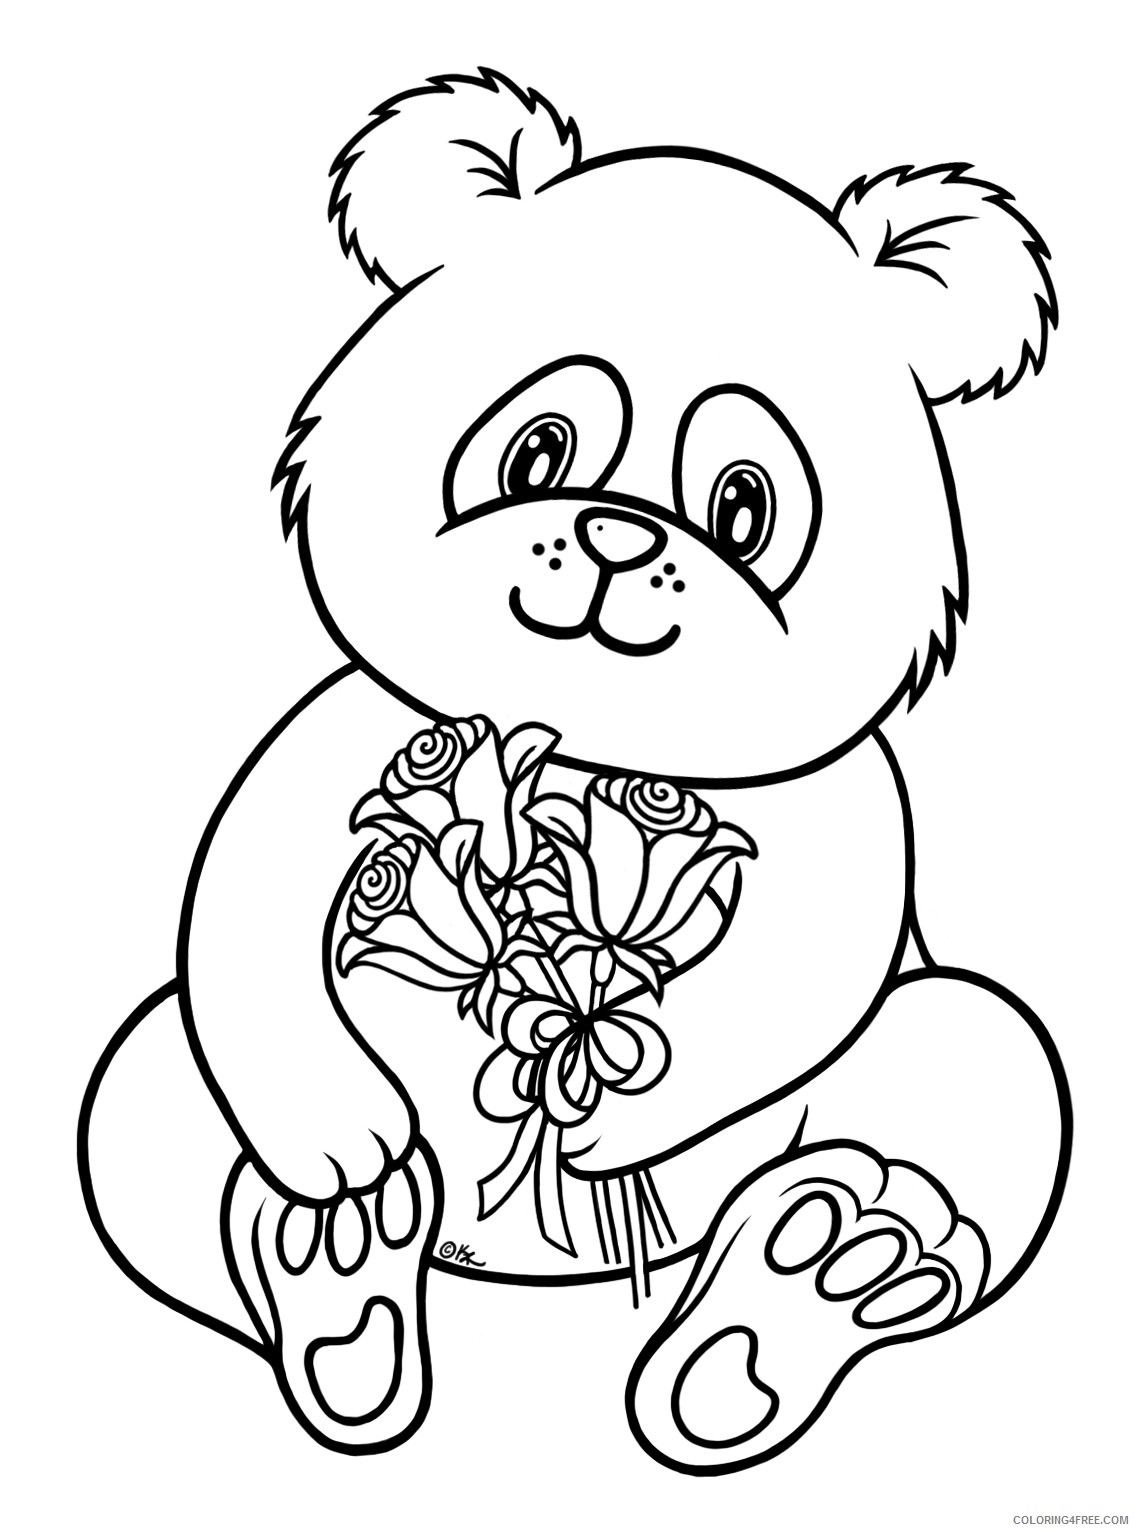 panda coloring pages with flowers Coloring4free